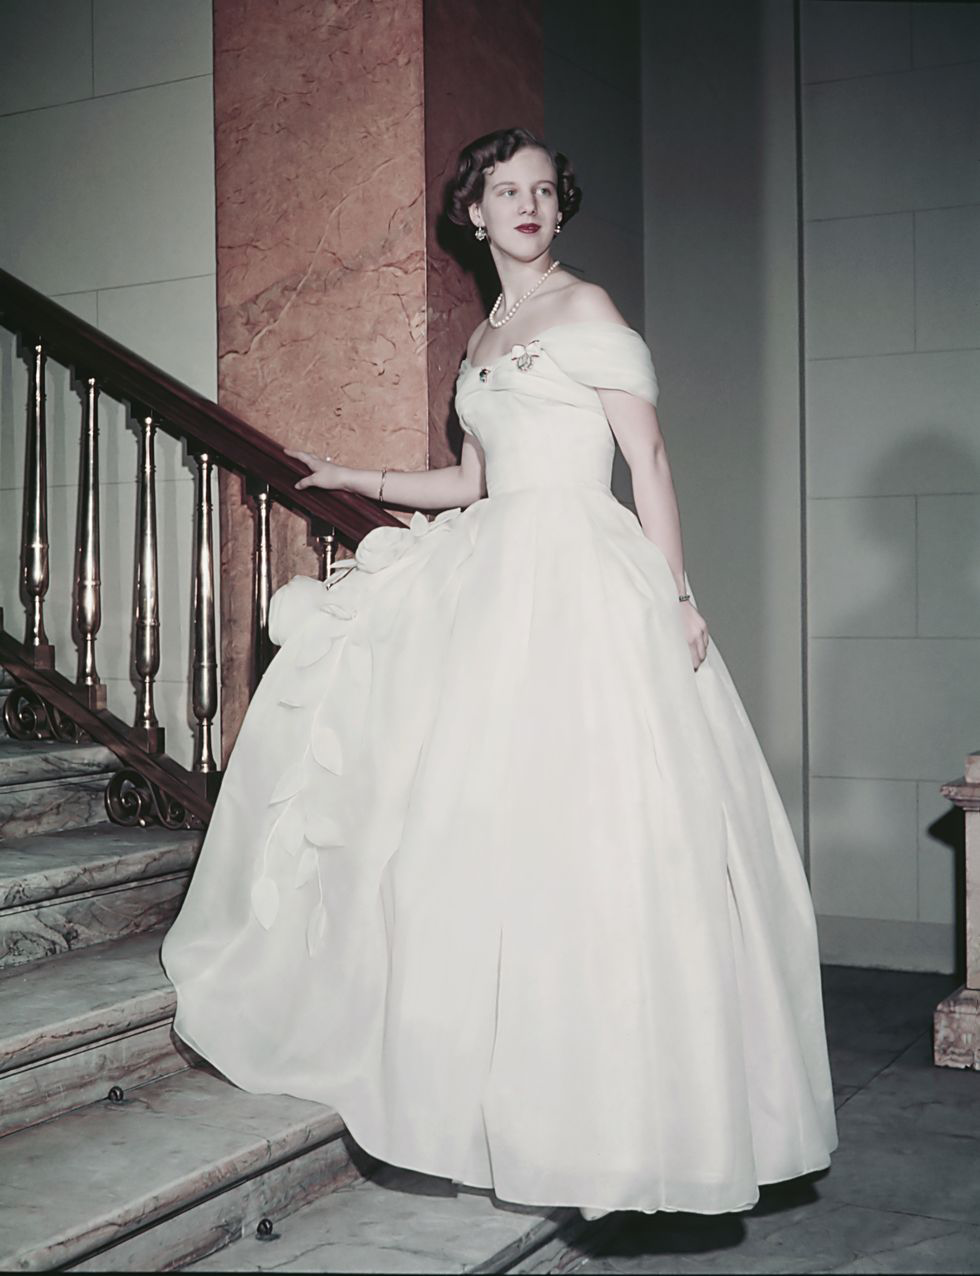 Princess Margrethe of Denmark’s official photograph for her 18th birthday, 26 March 1958. Getty Images